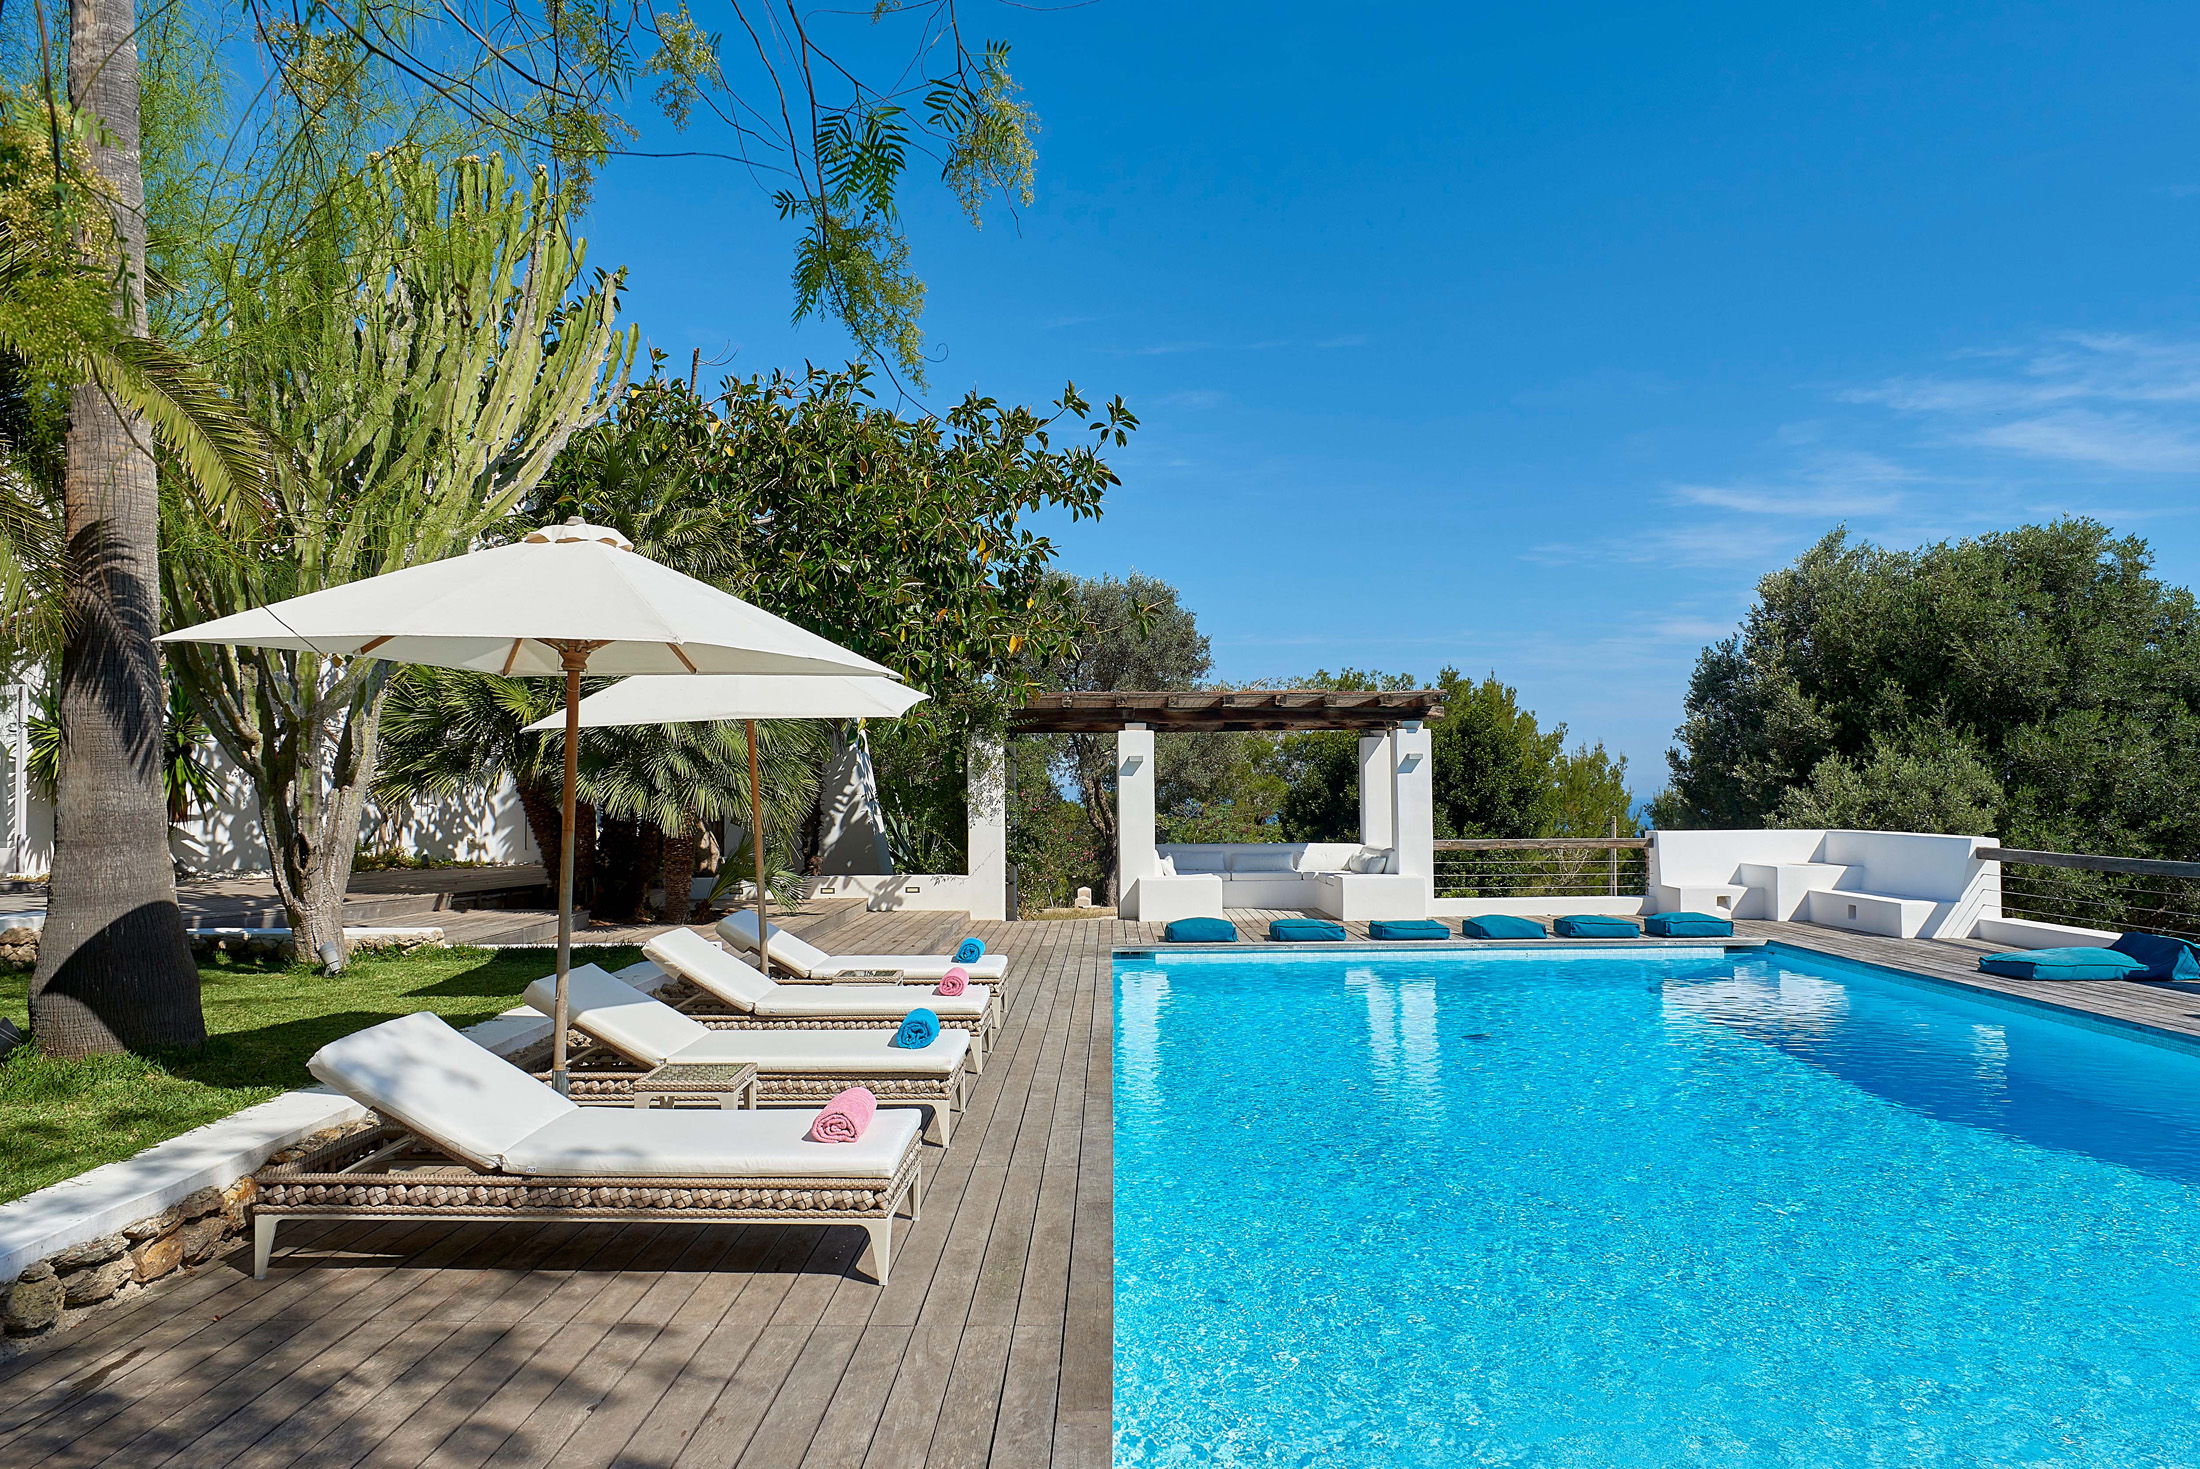 Sun loungers by a pool at a villa in Ibiza